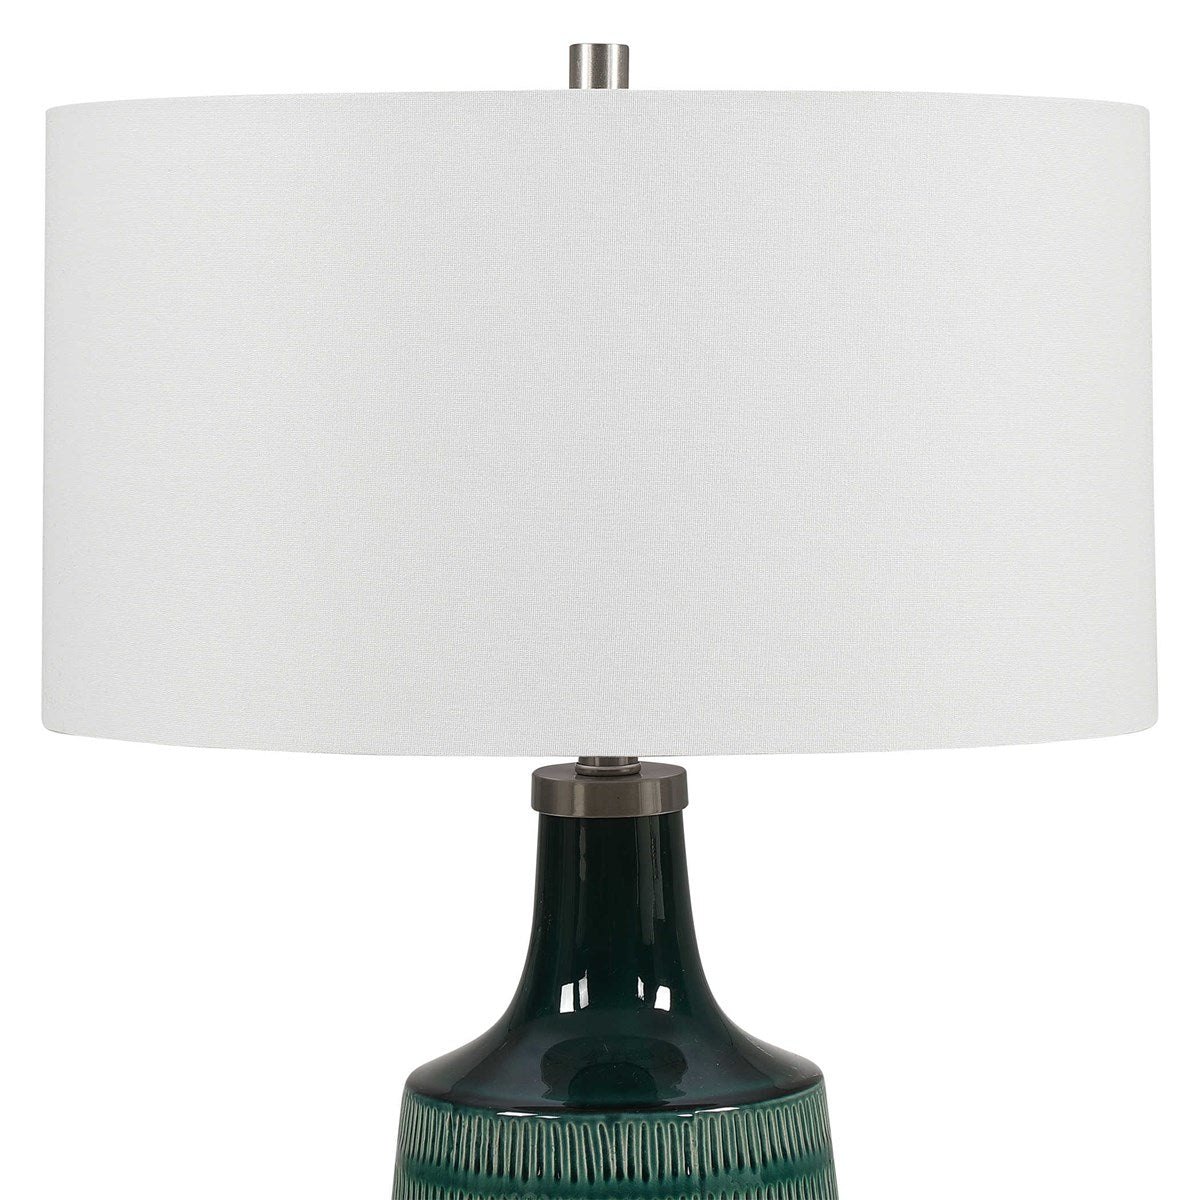 Scouts Table Lamp, Teal